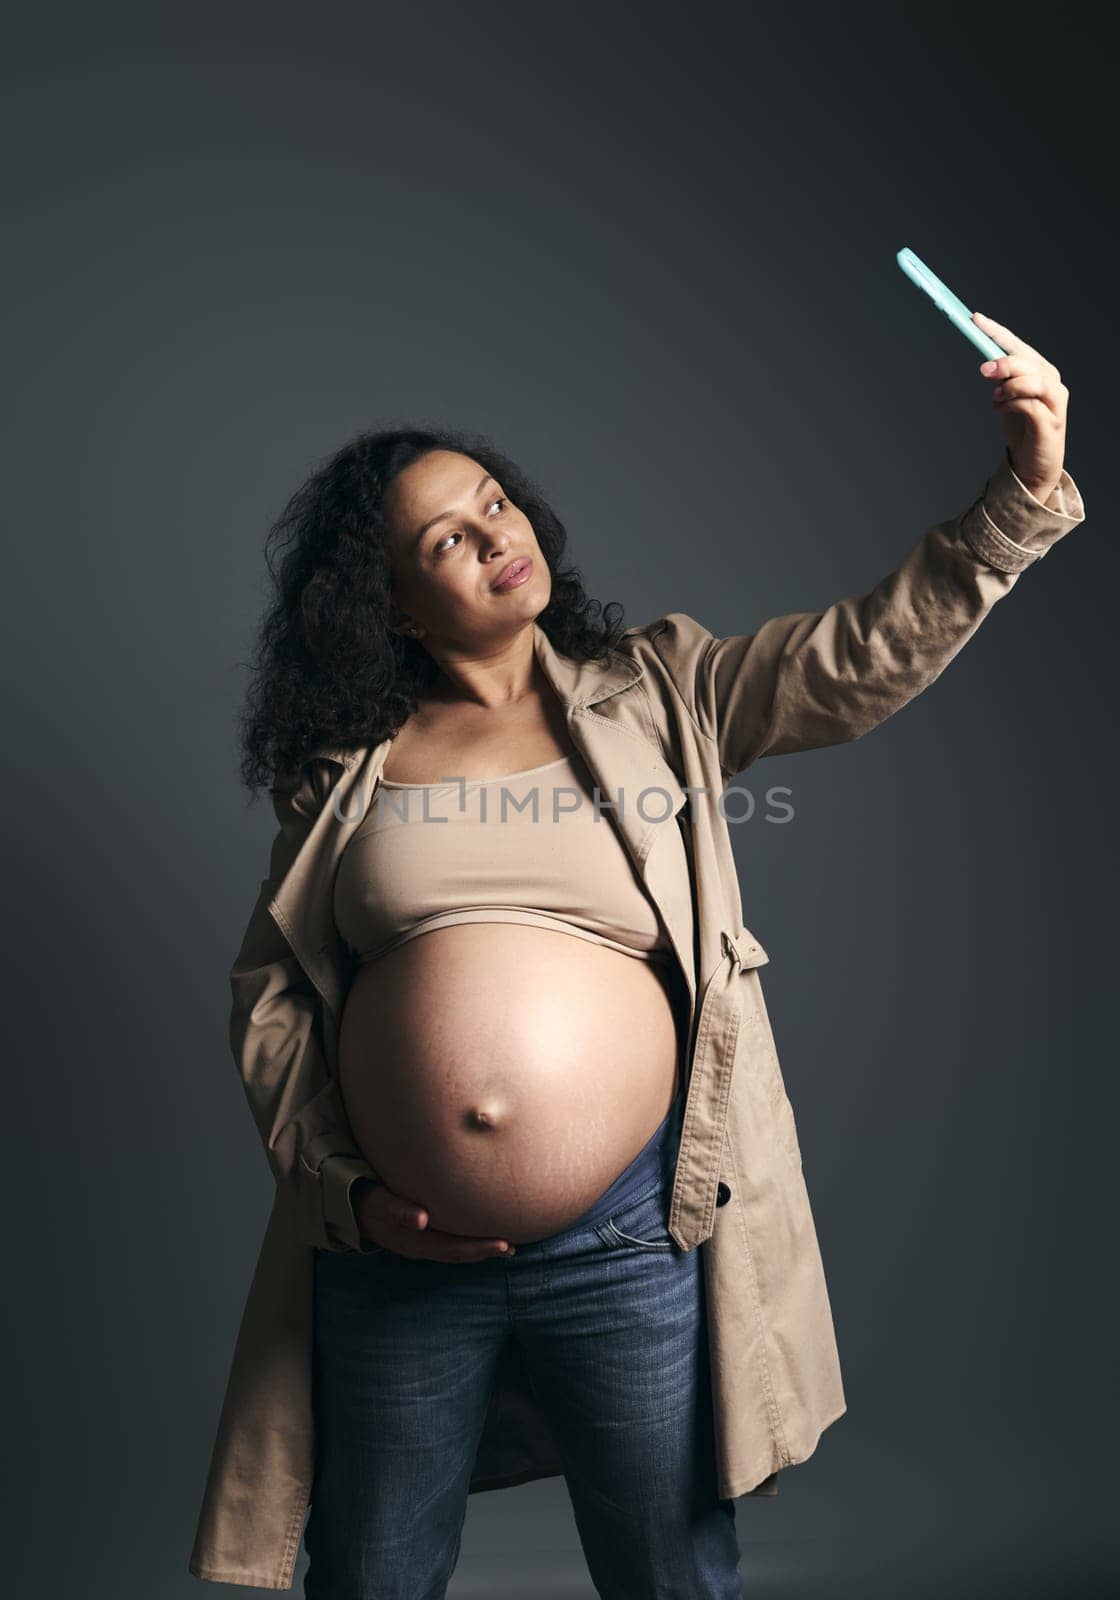 Happy pregnant woman takes self portrait on mobile phone while strokes her big belly, shares her lifestyle in last trimester of pregnancy on social media, isolated over fashion gray studio background